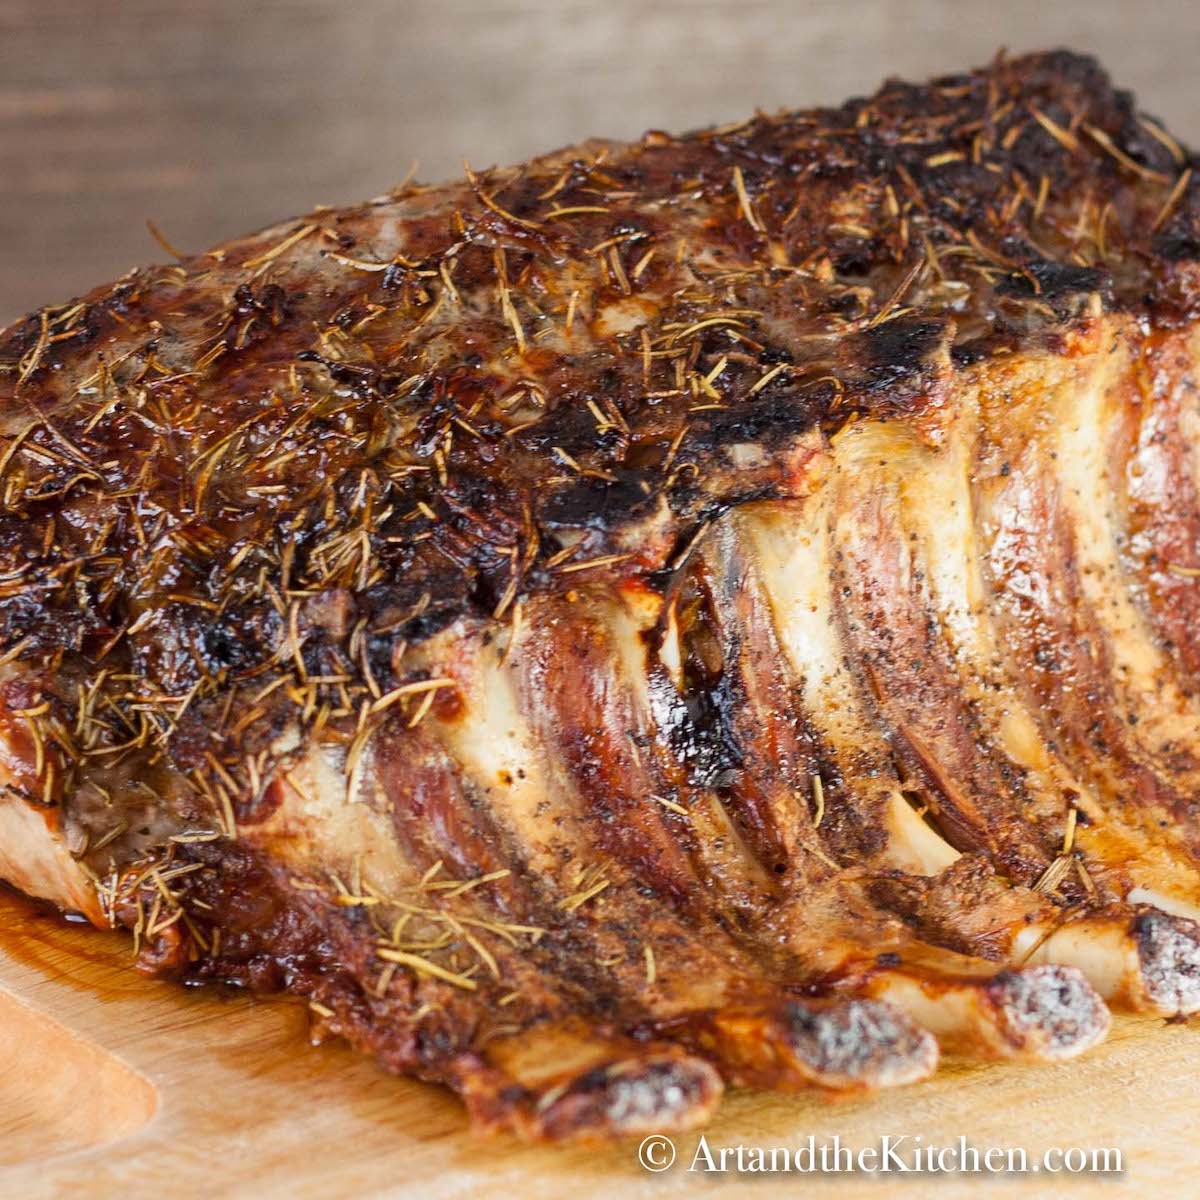 Cooked whole pork rib roast topped with herbs on wood cutting board.